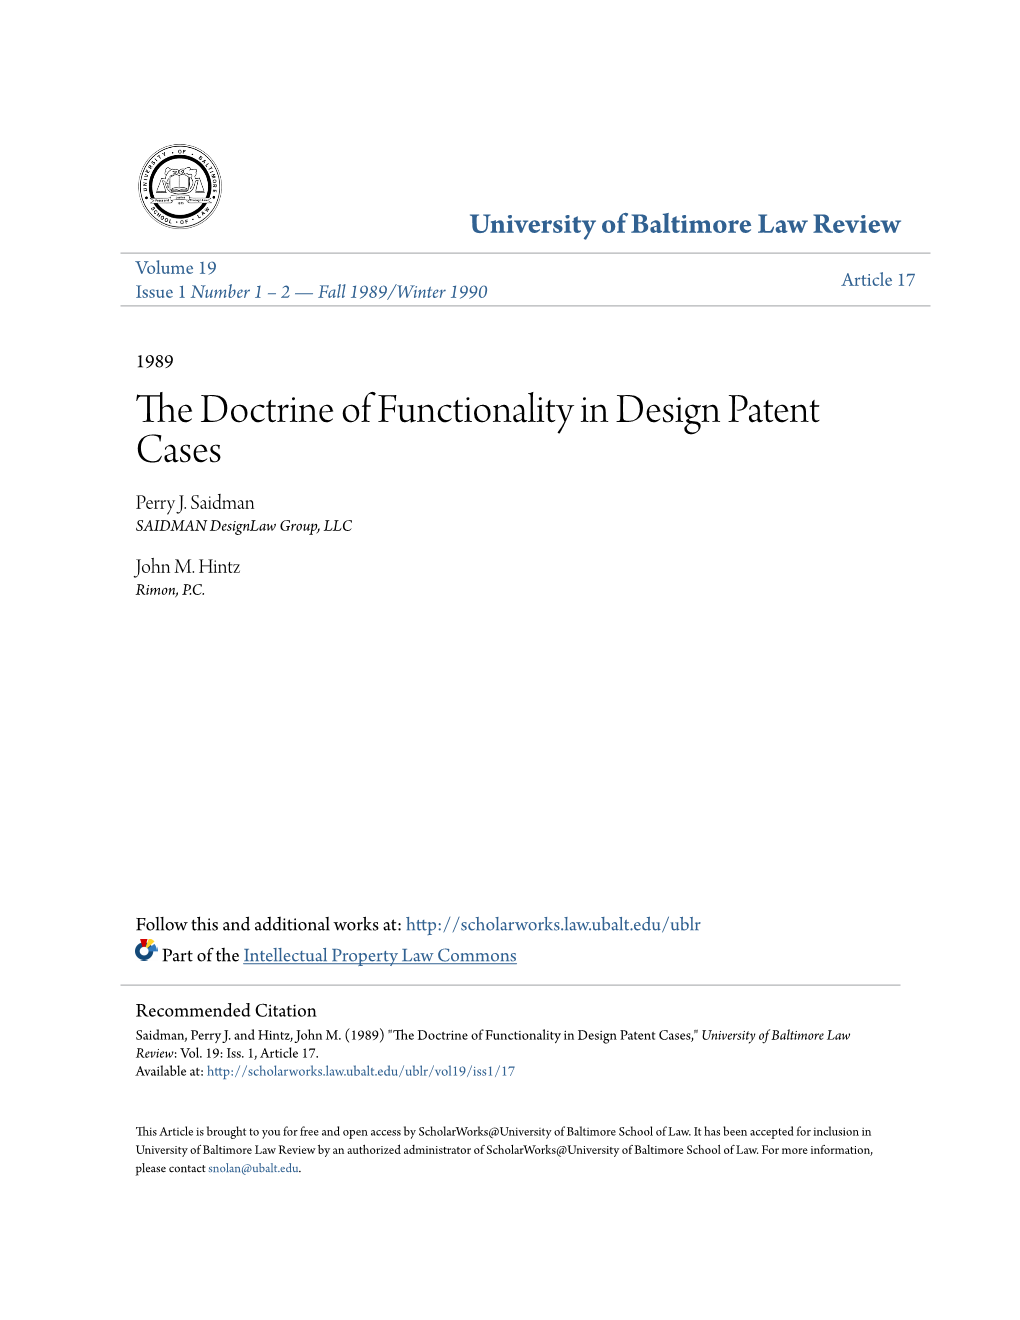 The Doctrine of Functionality in Design Patent Cases